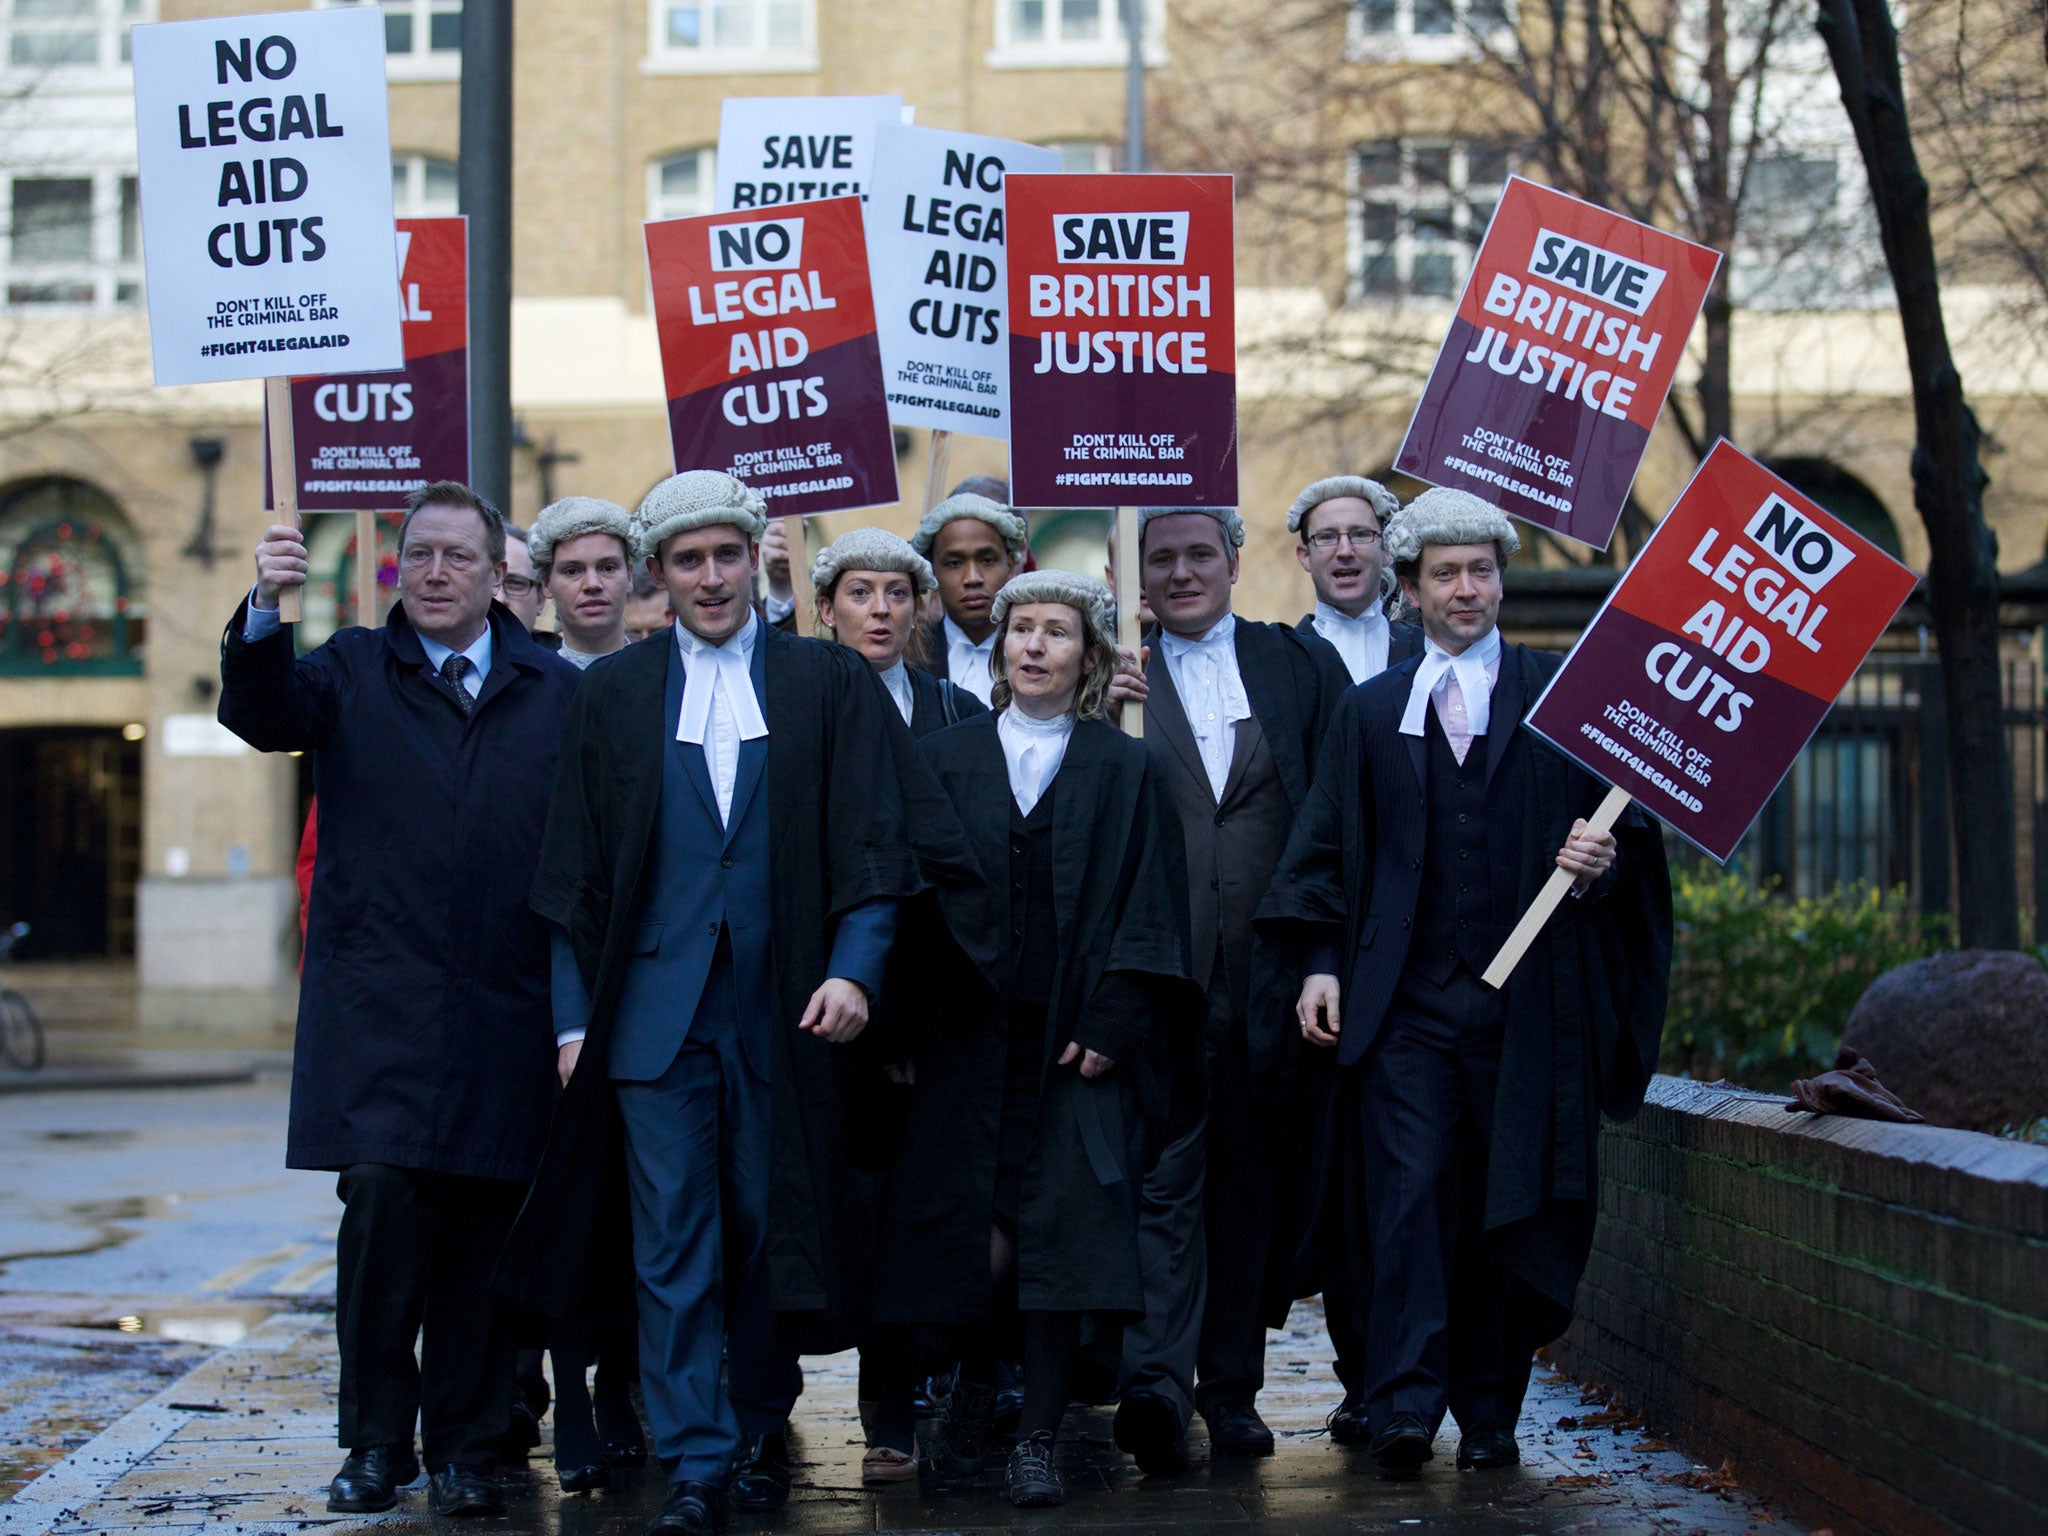 Legal professionals demonstrated against cuts to the legal aid budget on 6 January 2014, effectively going on strike (AFP/Getty)